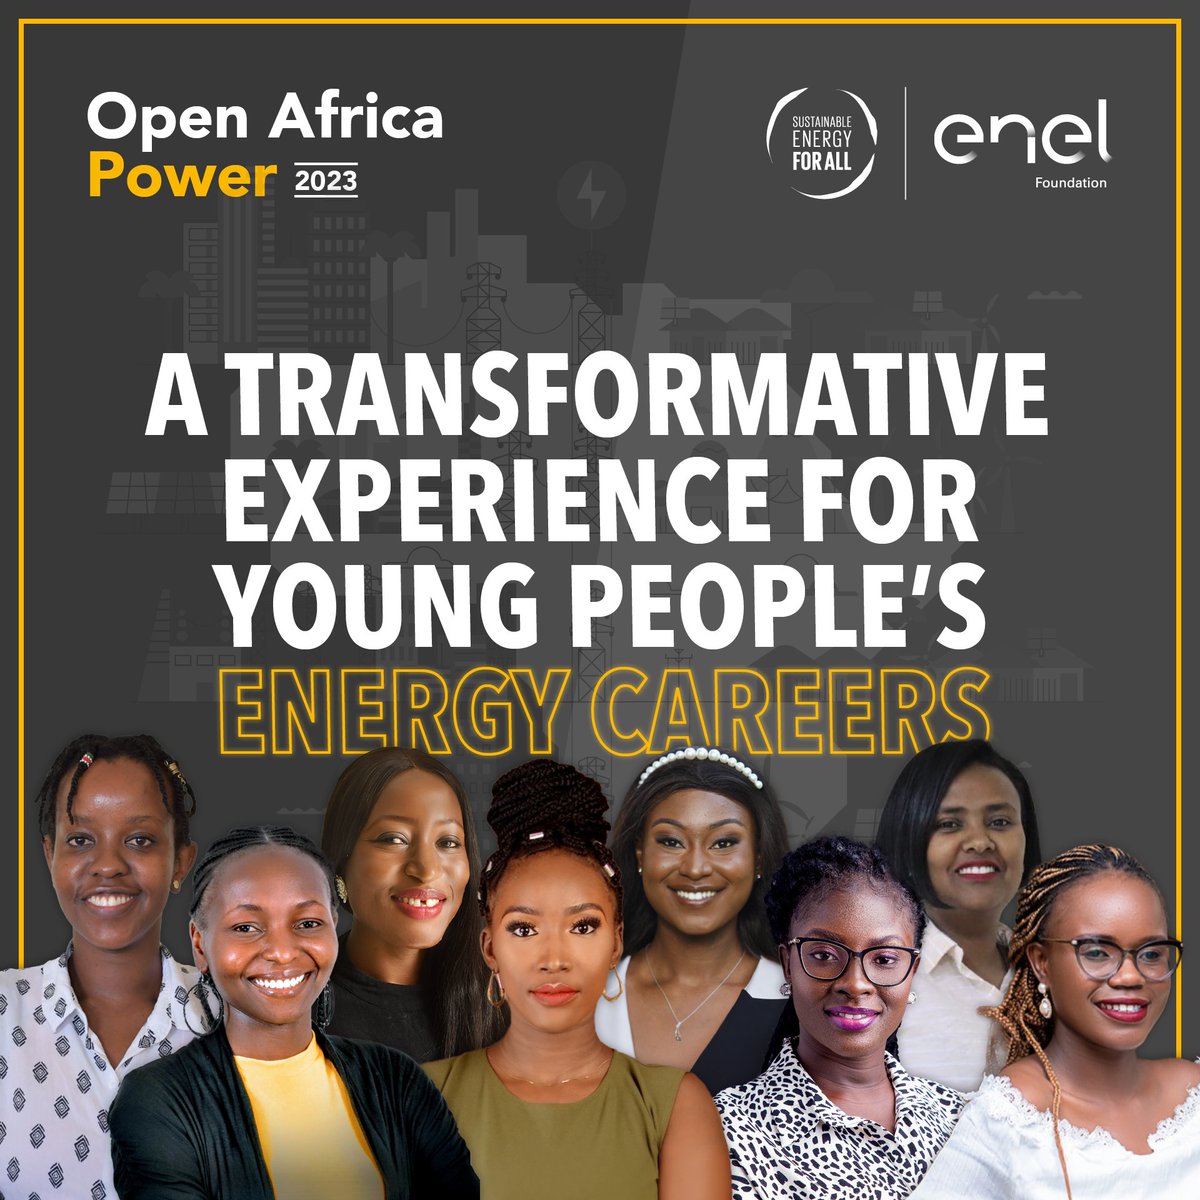 Investing in #youth is crucial, as they hold the key to accelerating progress and shaping the future of sustainable #energy. This is why we champion the Open Africa Power programme, an initiative jointly managed by @EnelFoundation & @SEforALLorg. seforall.org/news/open-afri…